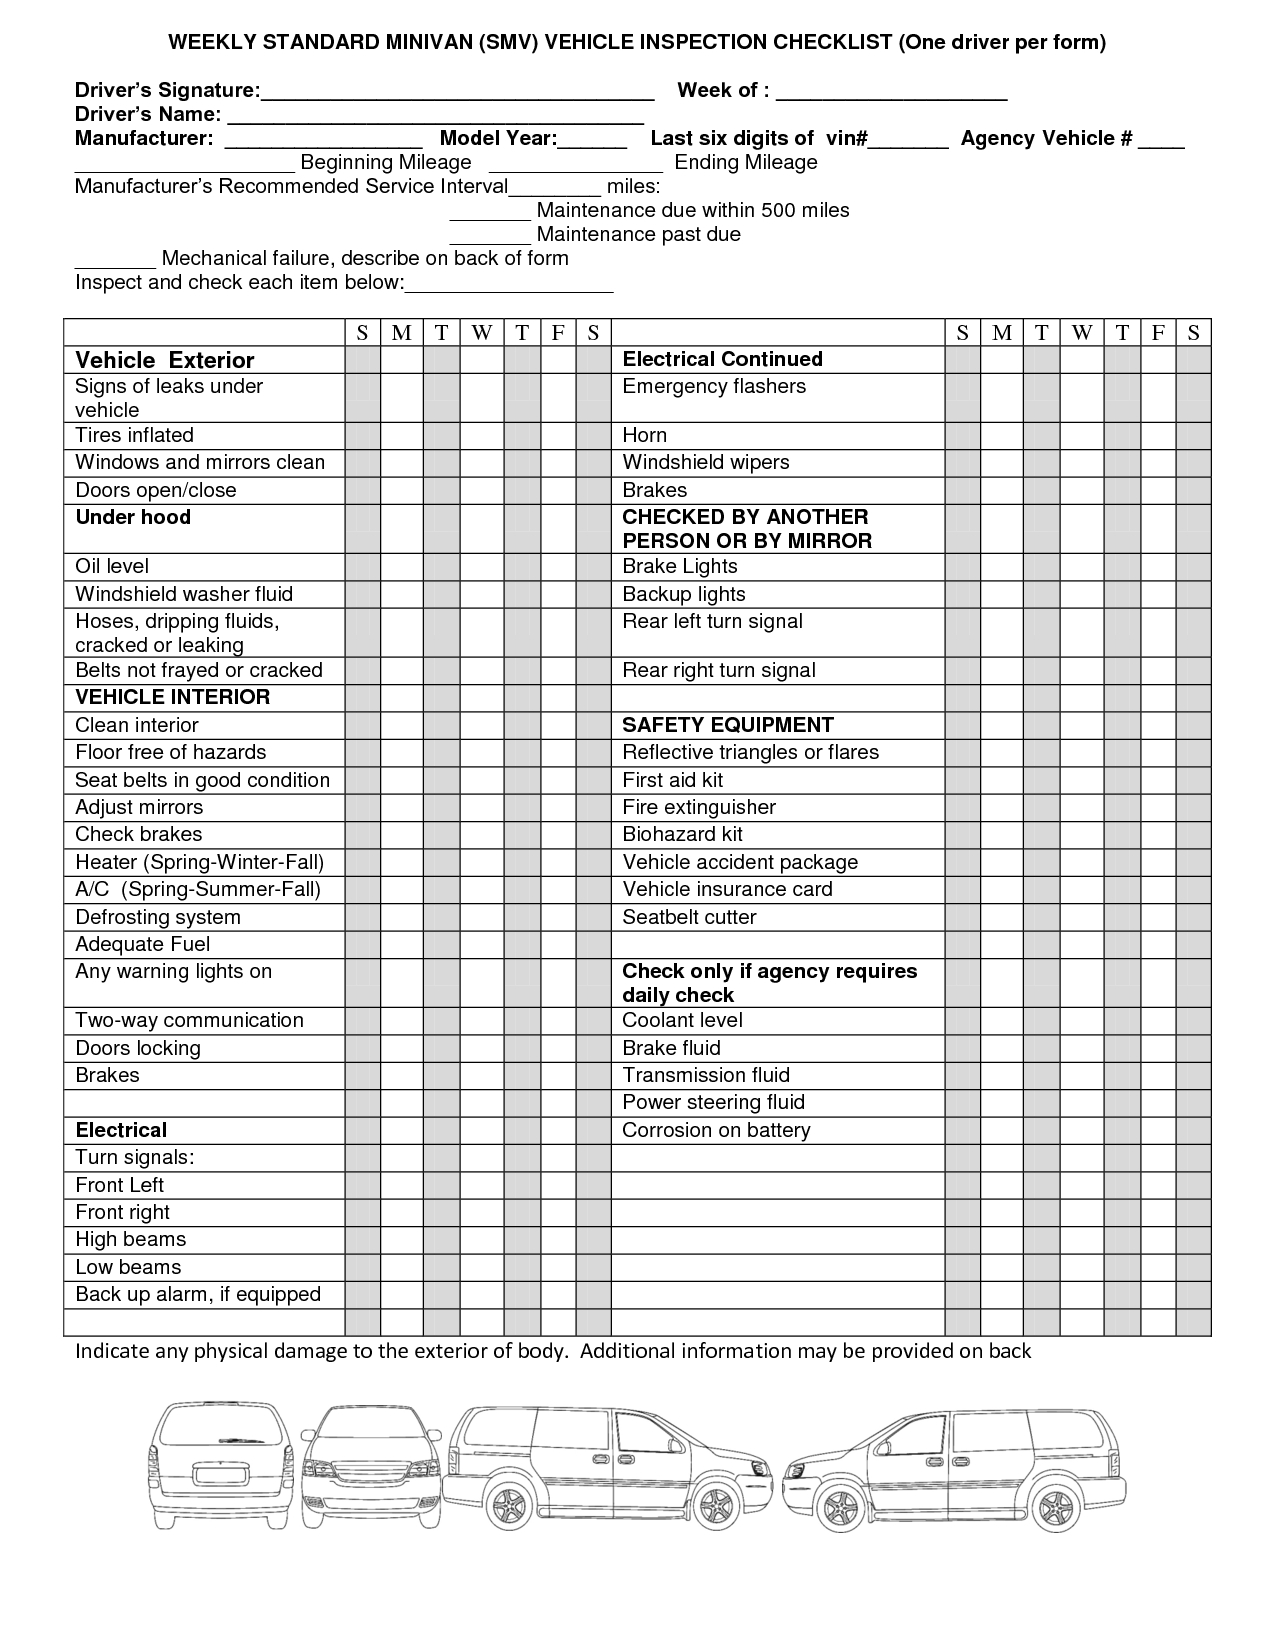 Weekly Vehicle Inspection Checklist Template | Vehicle Intended For Vehicle Checklist Template Word